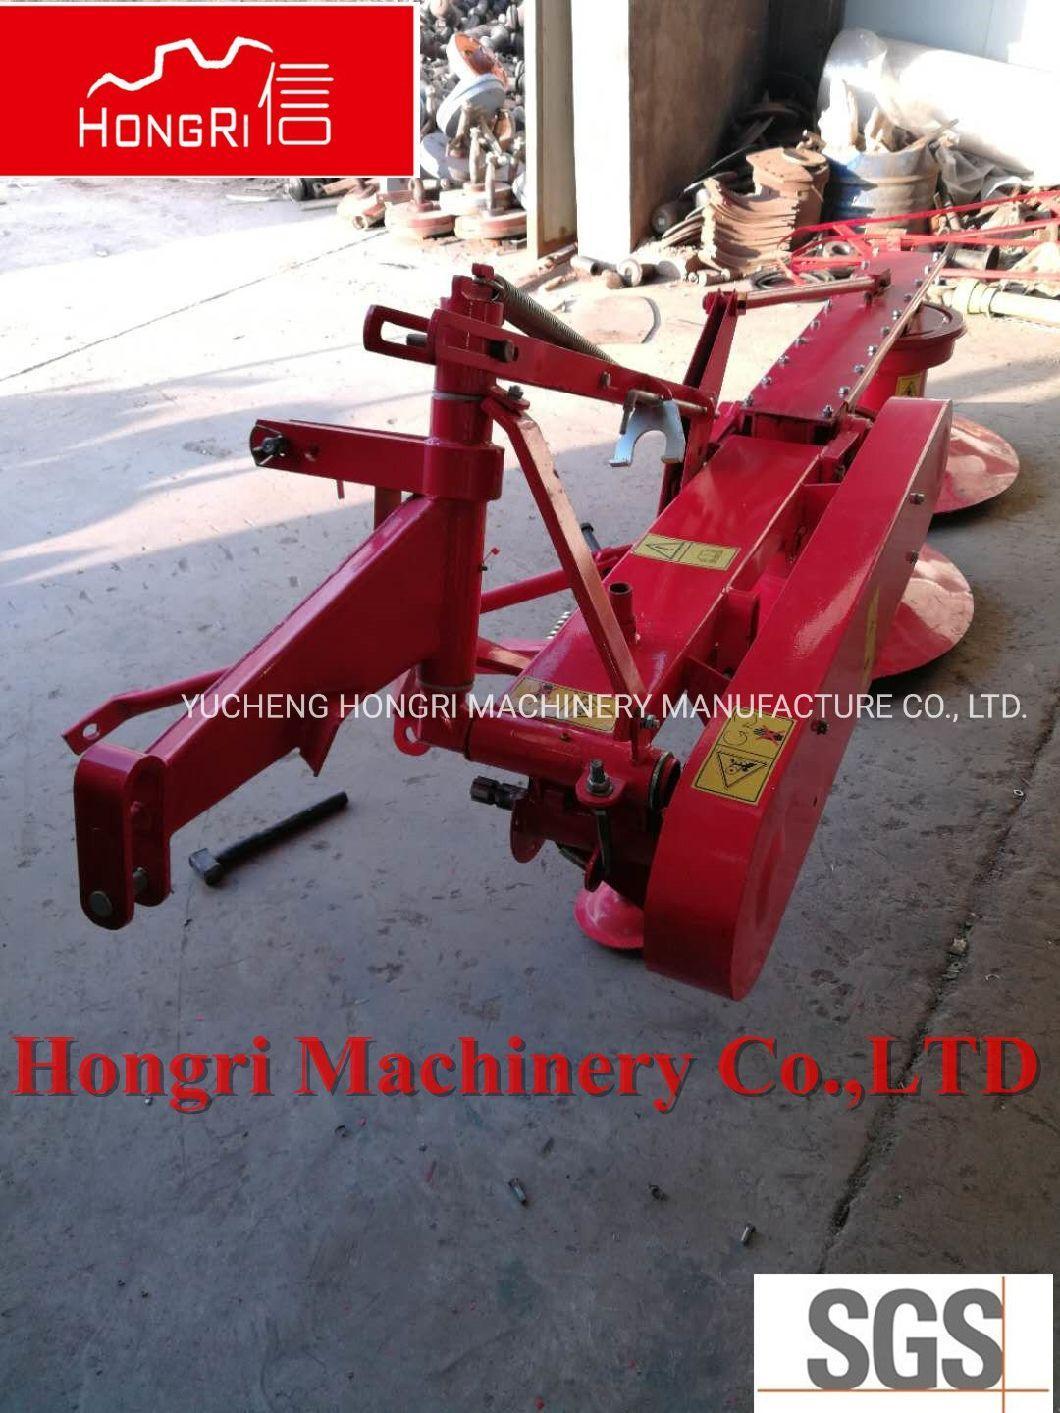 Hongri Agricultural Machinery Low Cutting Height Drum Mower for Tractor